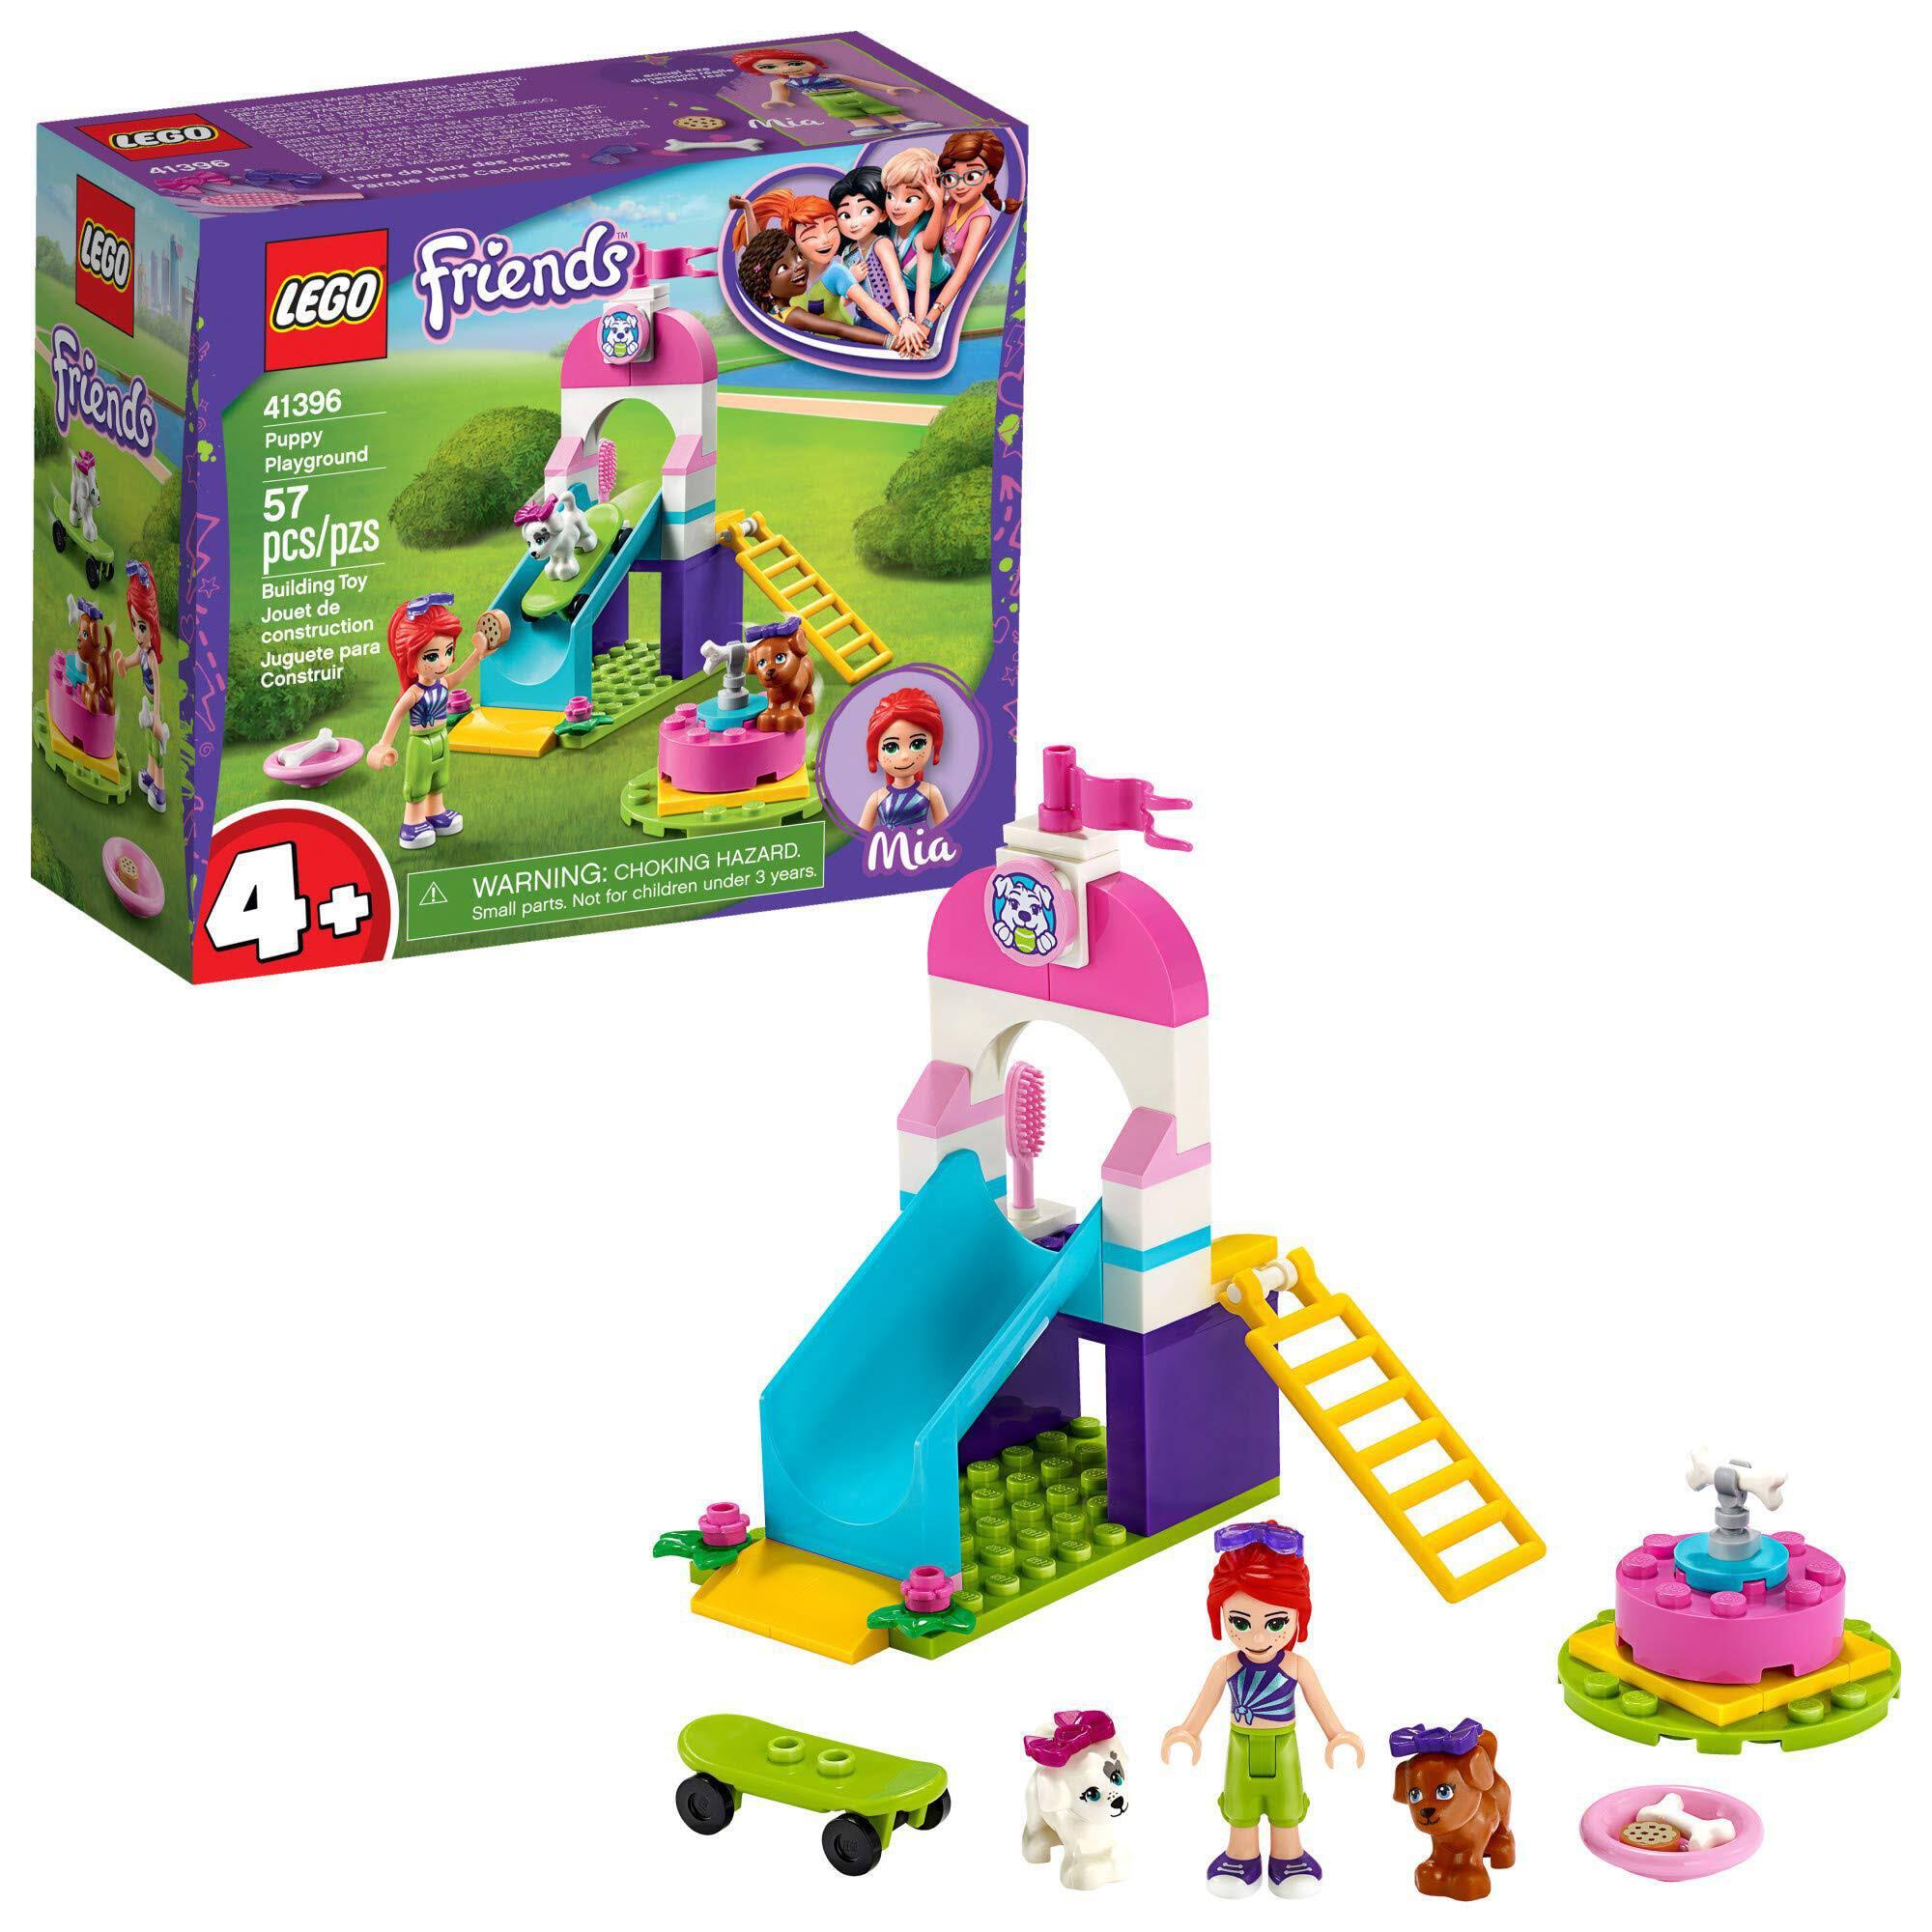 Lego Friends Puppy Playground, Building Toy, 57 Pieces - 57 pcs